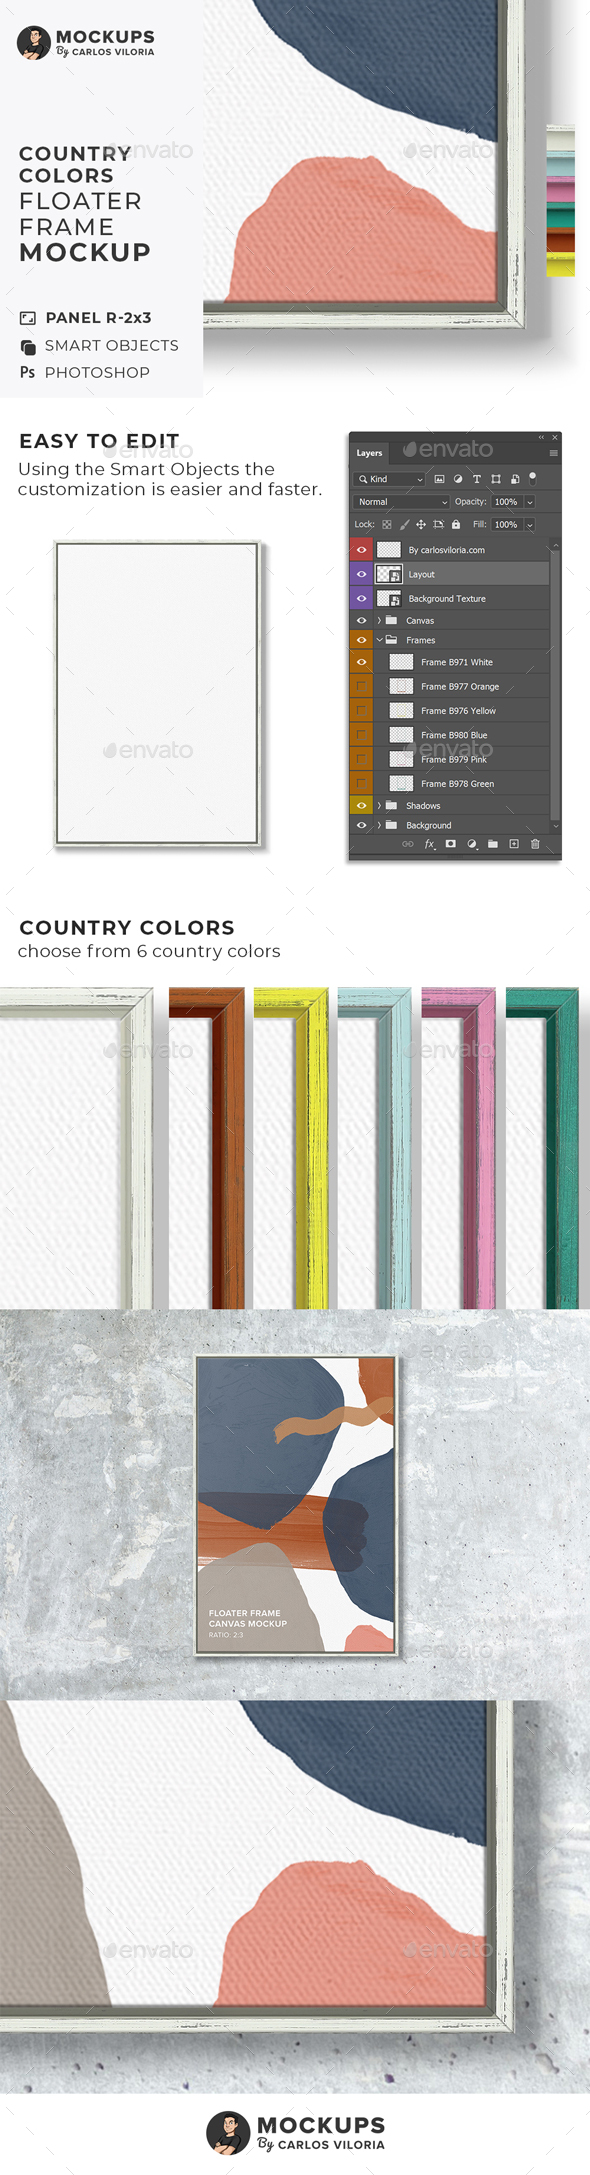 Floater Frame Canvas Ratio 2x3 Mockup - Country Colors